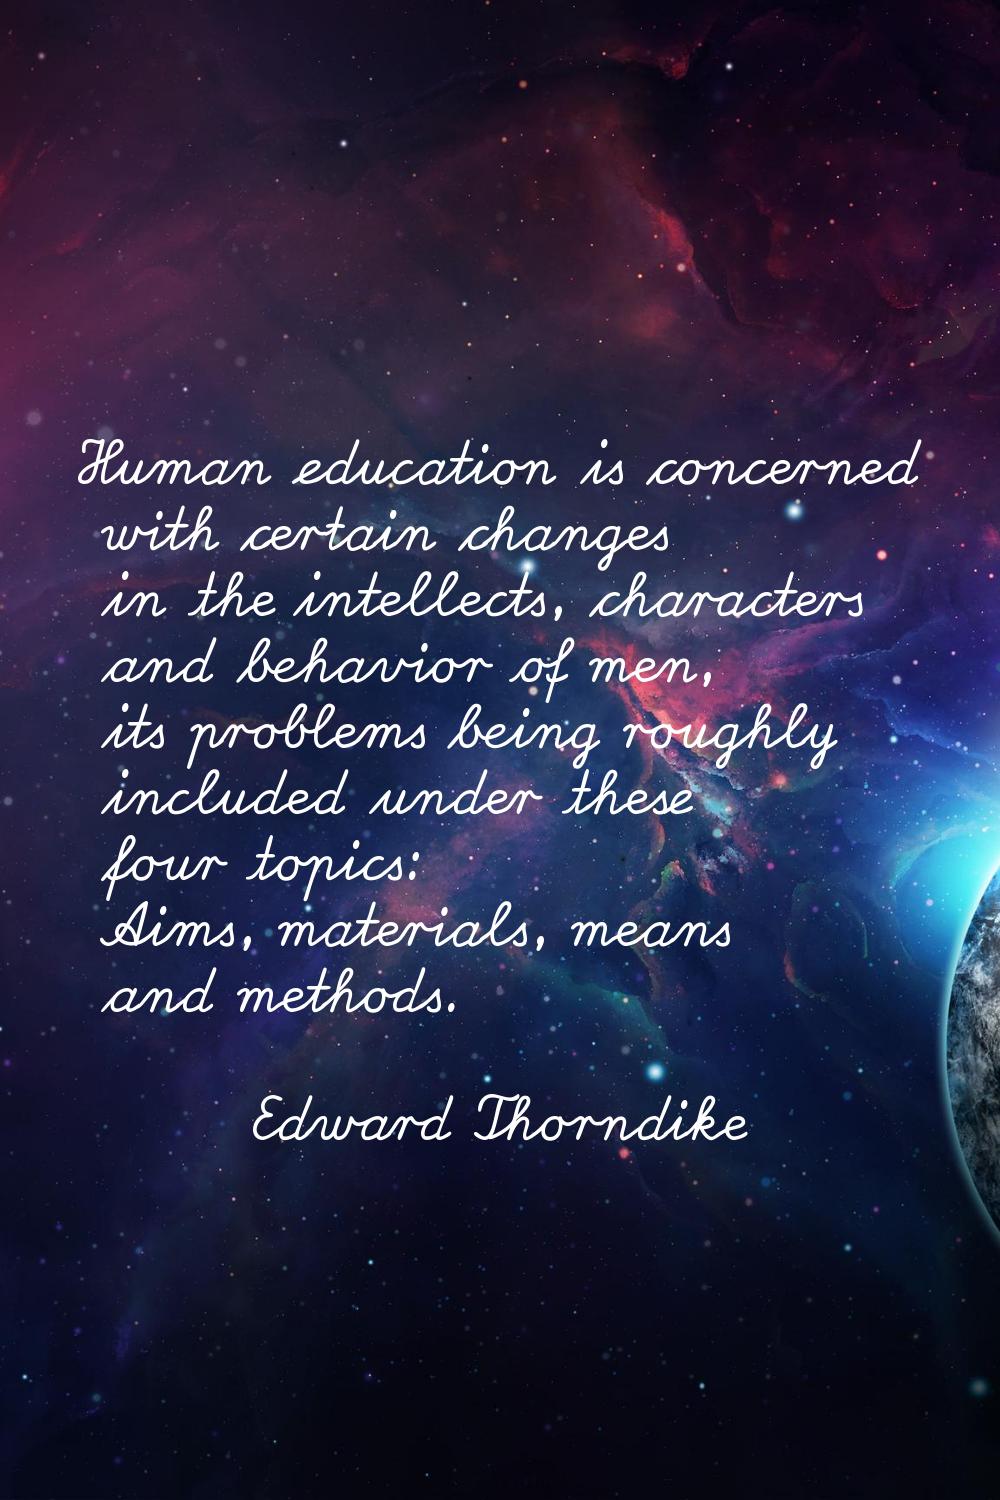 Human education is concerned with certain changes in the intellects, characters and behavior of men